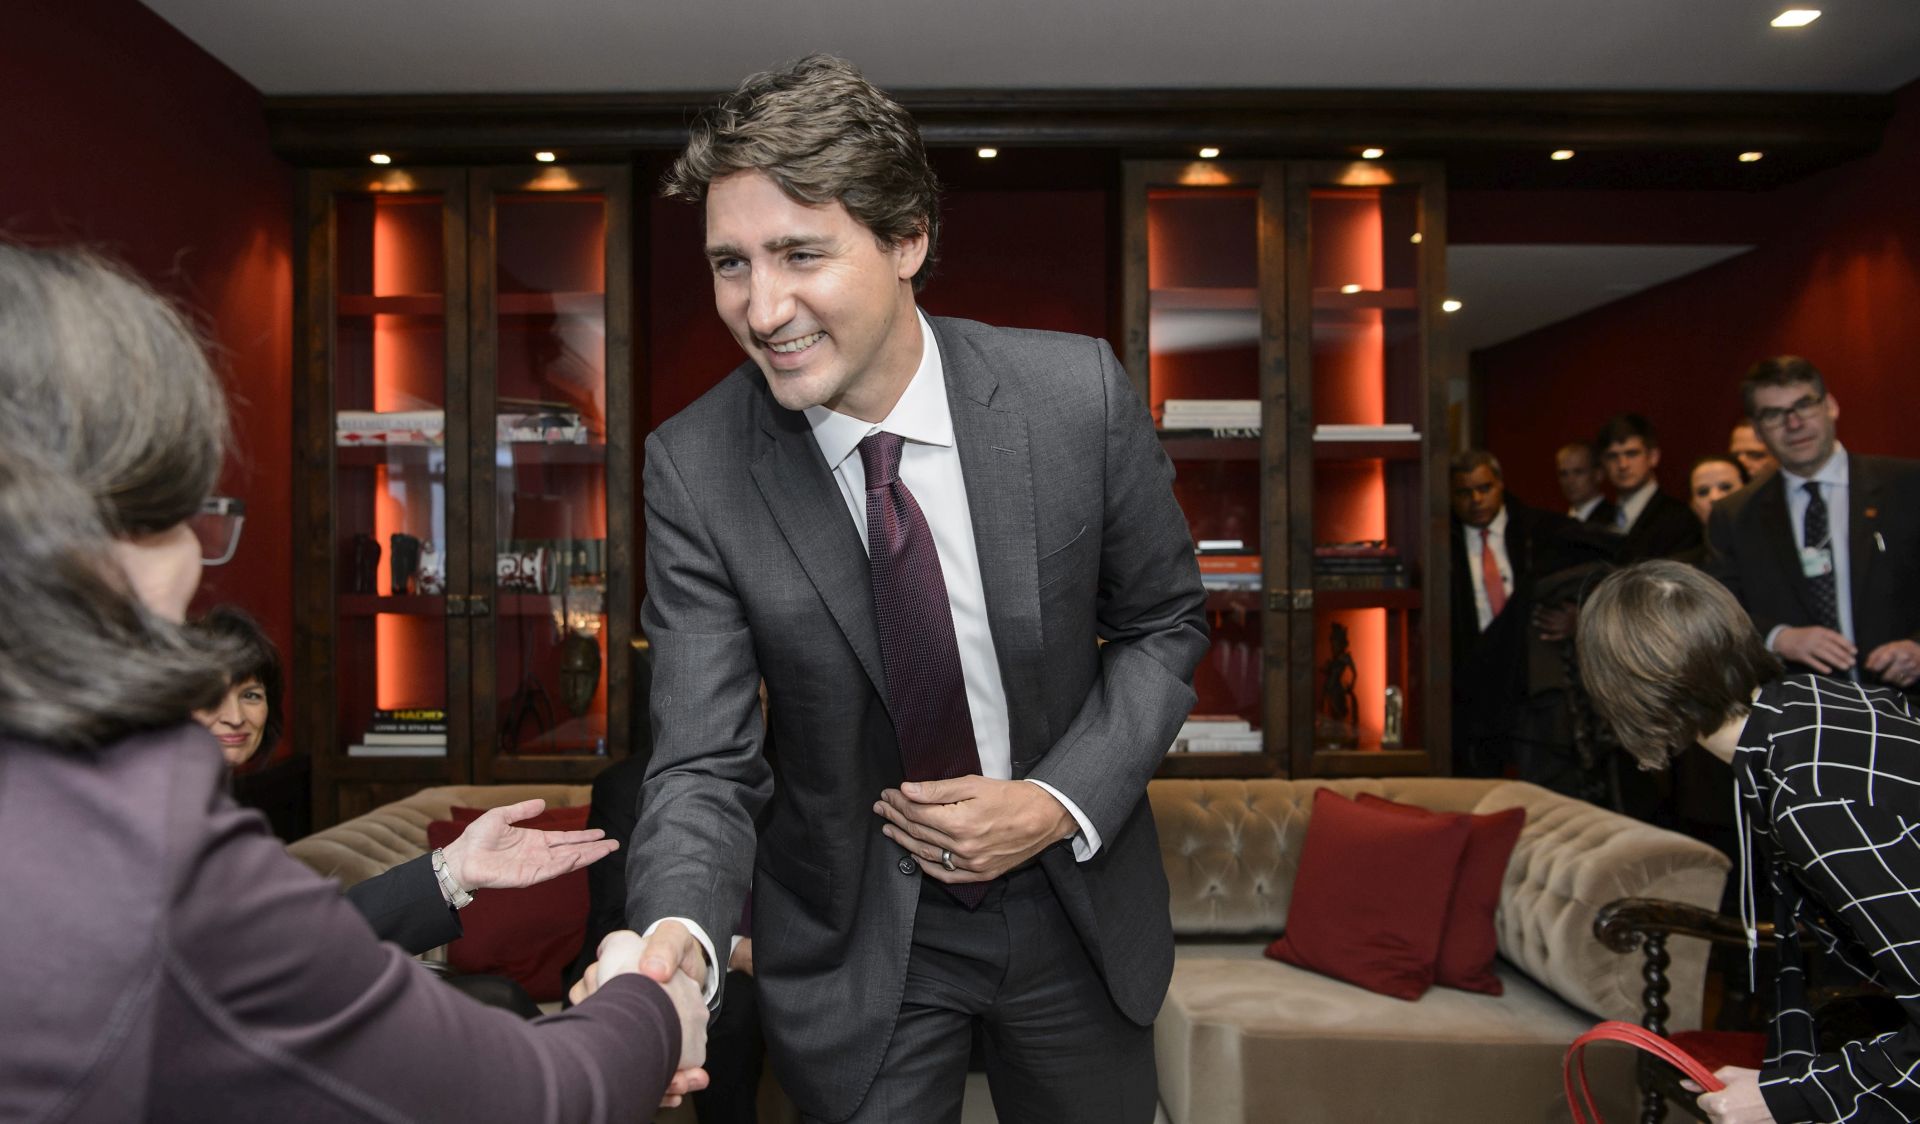 epa05115354 Canada's Prime Minister Justin Trudeau, shakes hands with members of the Swiss delegation during a bilateral meeting on the sideline of the 46th Annual Meeting of the World Economic Forum, WEF, in Davos, Switzerland, 21 January 2016. The overarching theme of the Meeting, which takes place from 20 to 23 January, is 'Mastering the Fourth Industrial Revolution.'  EPA/JEAN-CHRISTOPHE BOTT